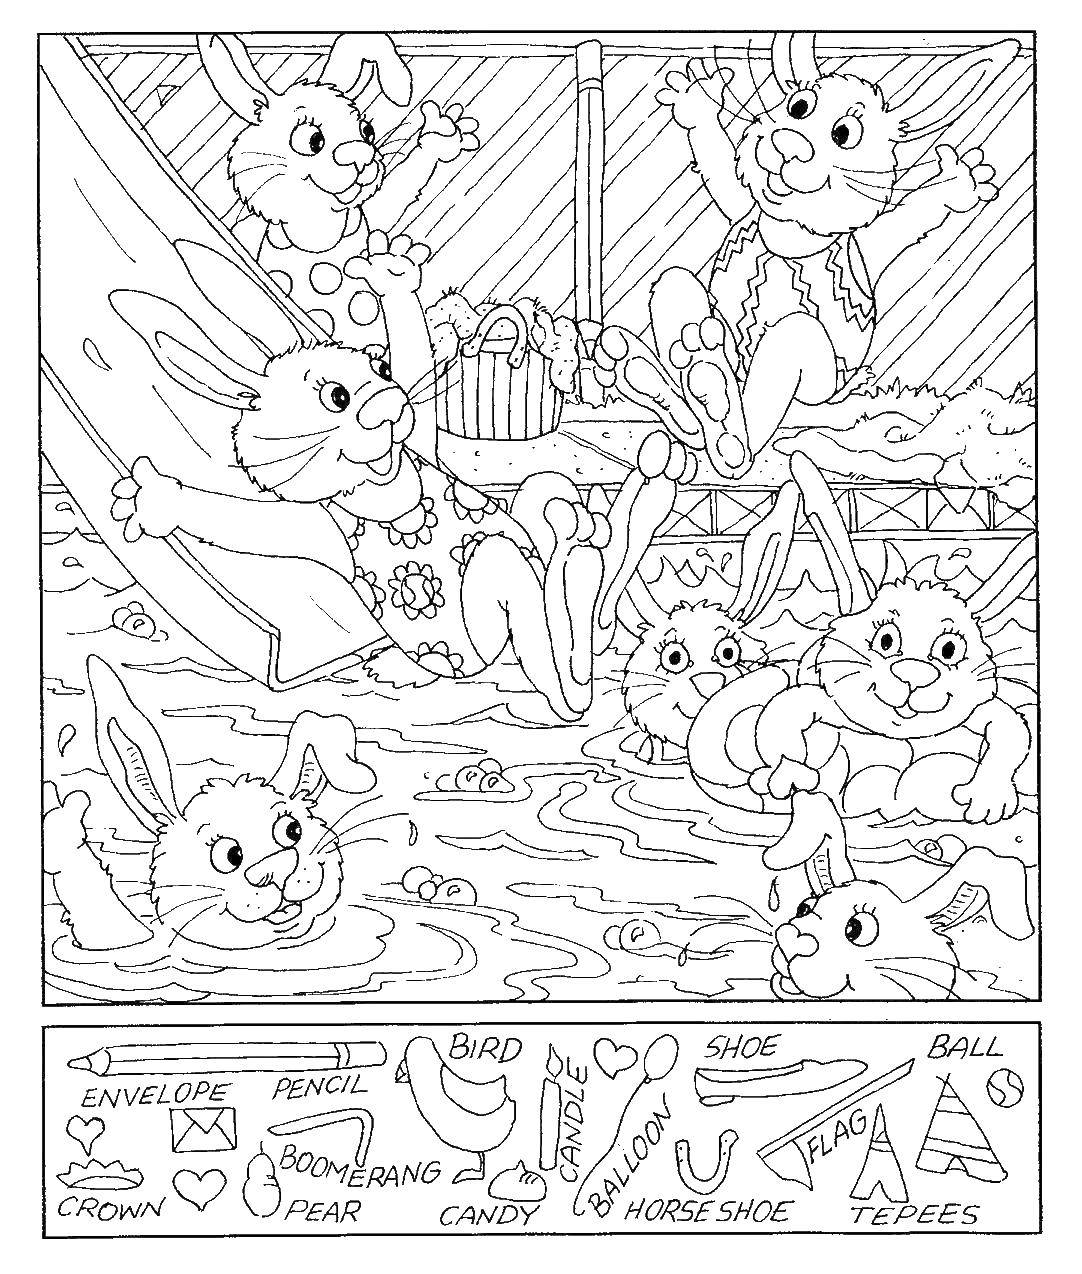 Coloring Bunnies on a picnic. Category Find what is hidden. Tags:  picnic, hares, swim, fun birds.